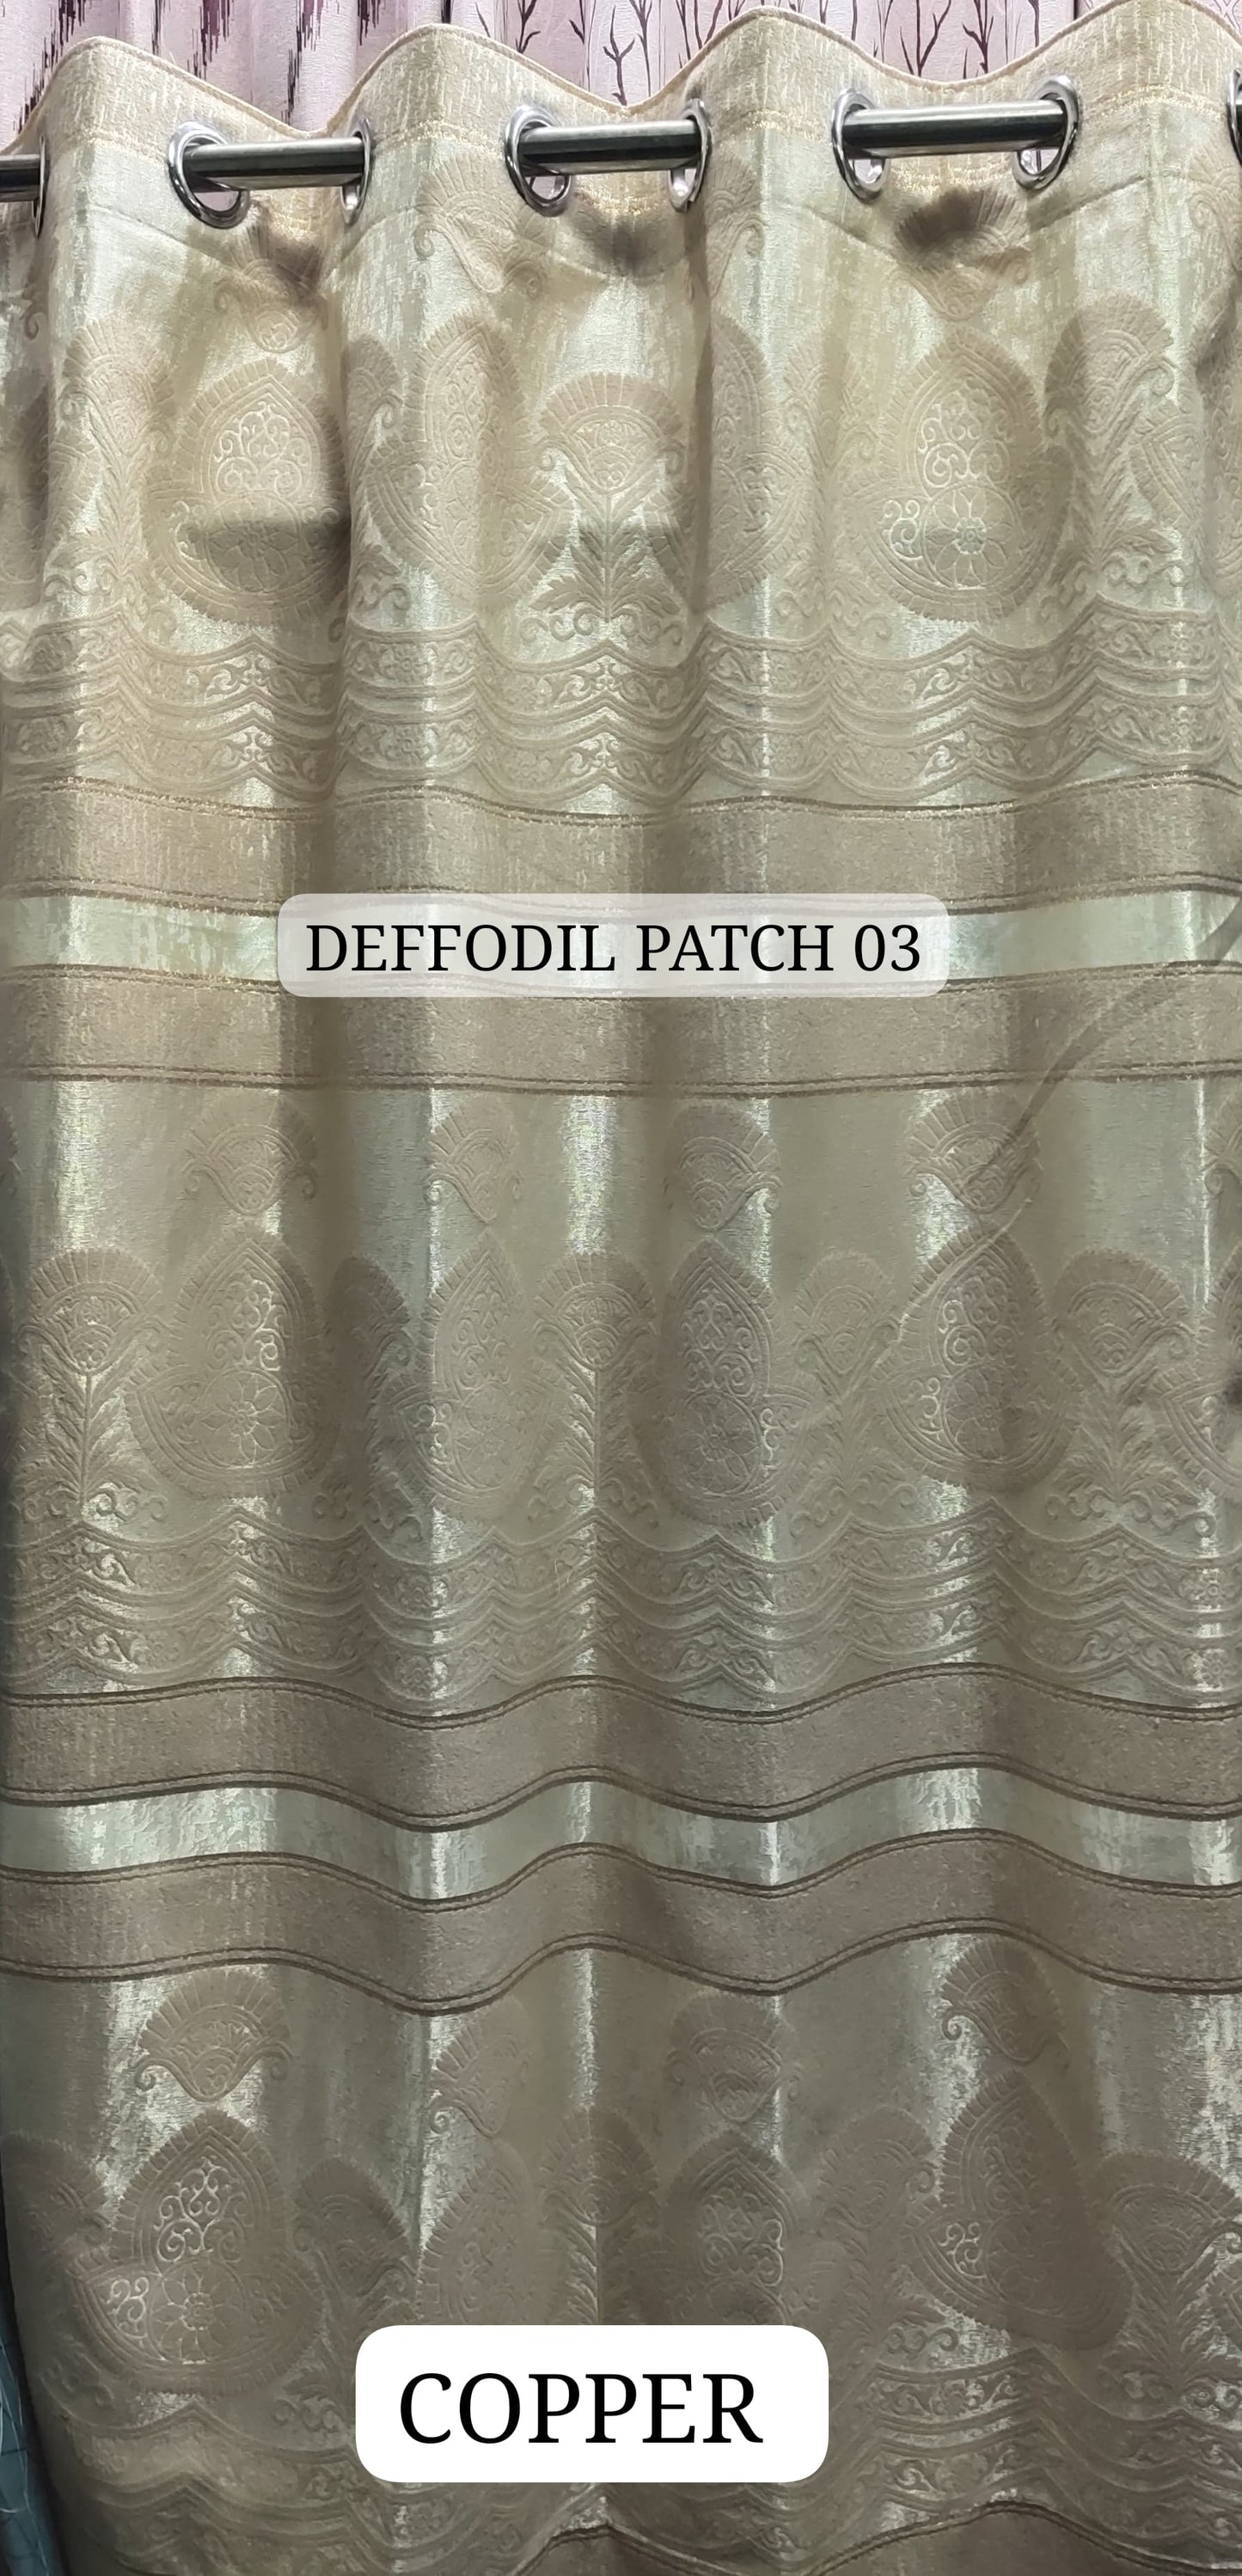 DEFFODIL PATCH ALLOVER 03